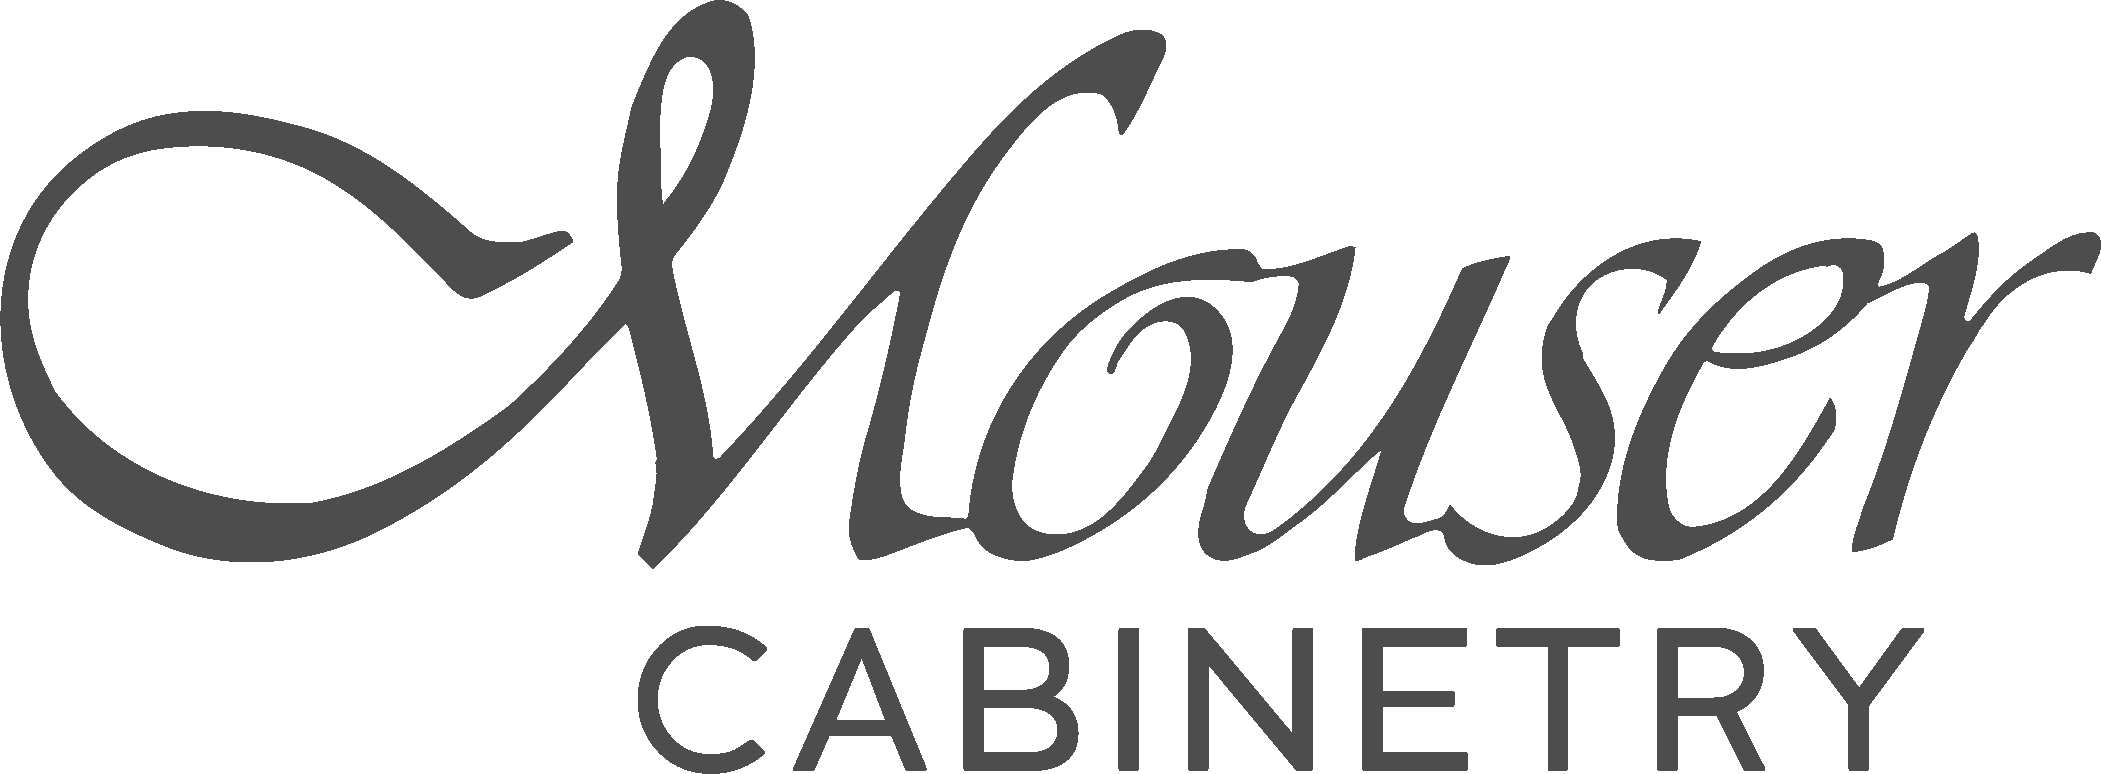 Mouser Cabinetry